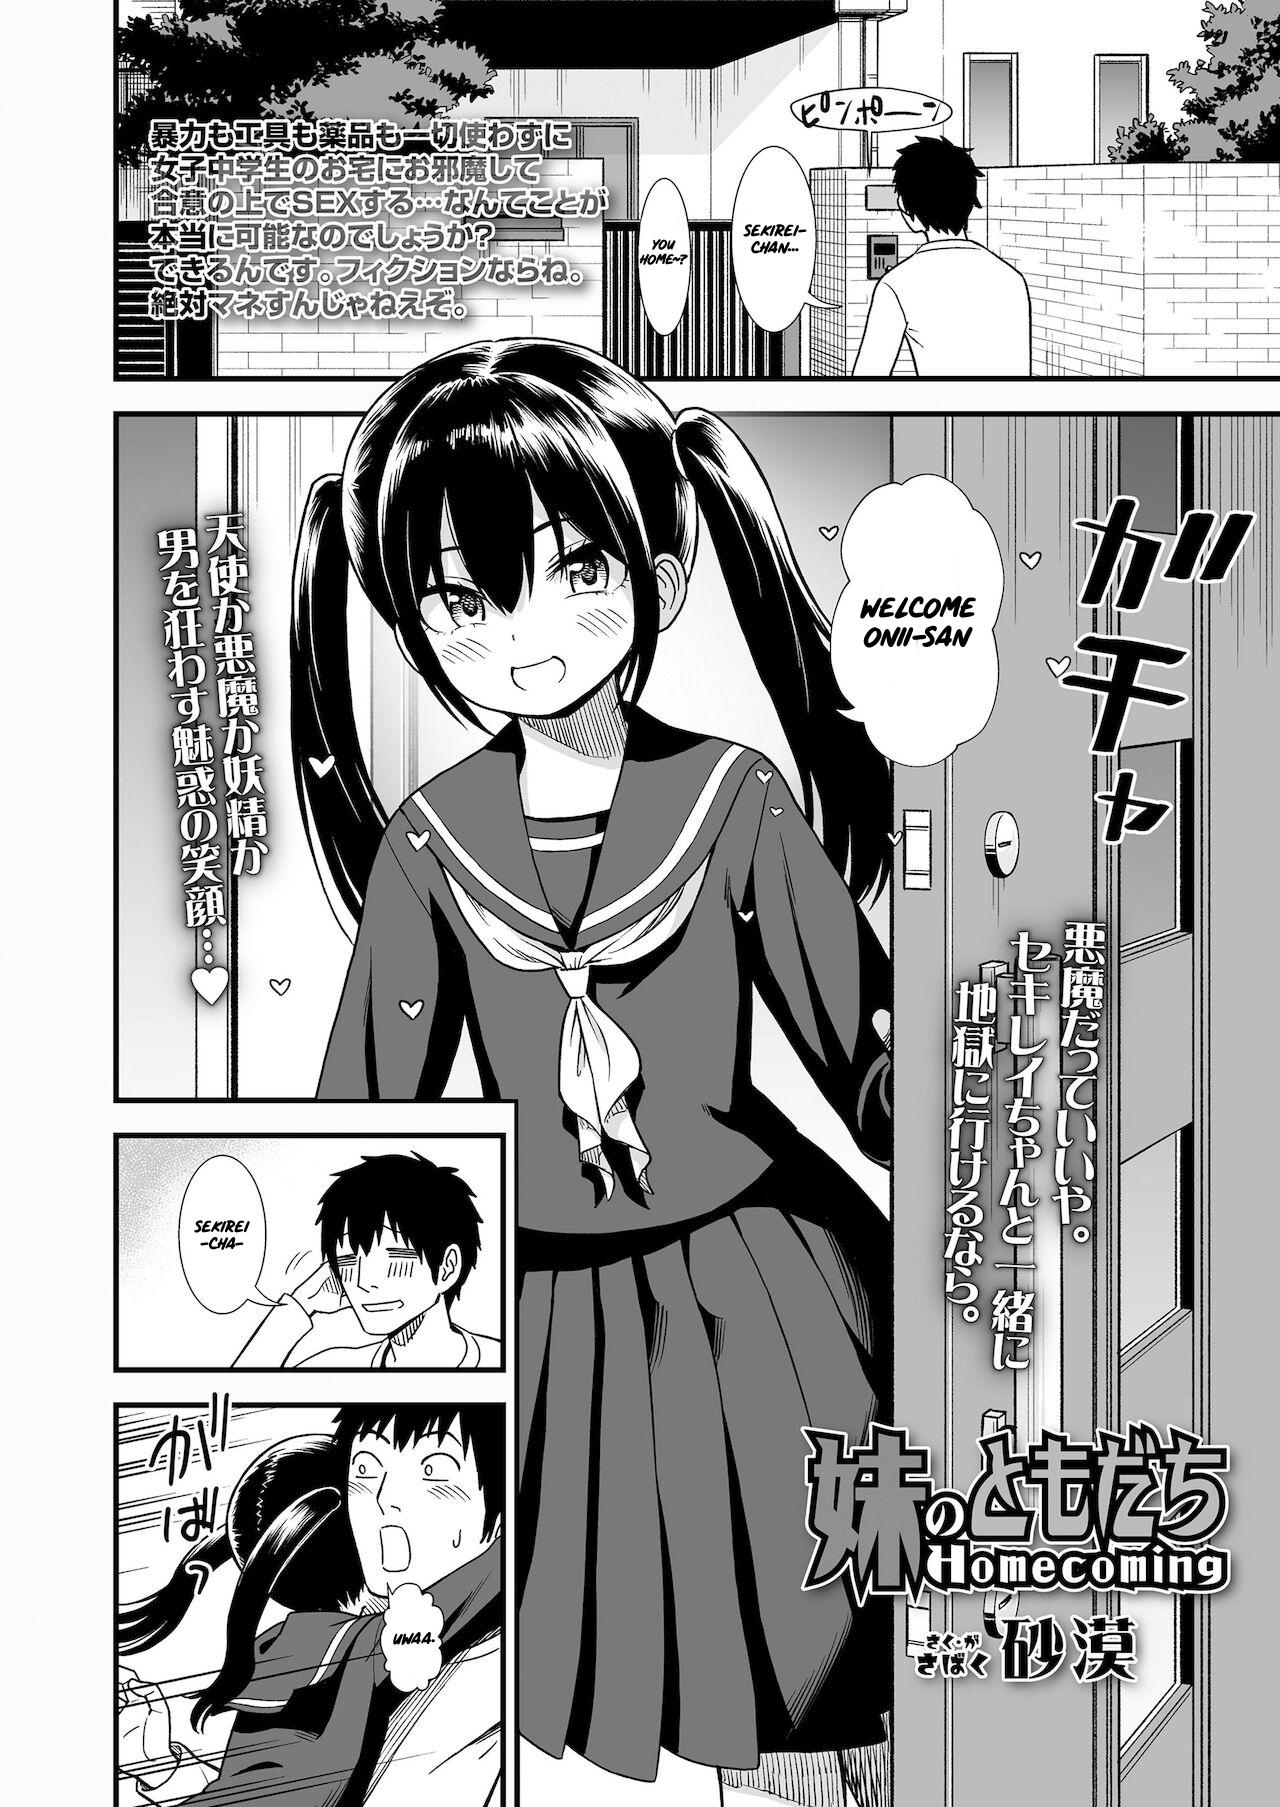 Hard Fucking Imouto no Tomodachi Homecoming | My Little Sister's Friend Homecoming Hidden Cam - Page 2